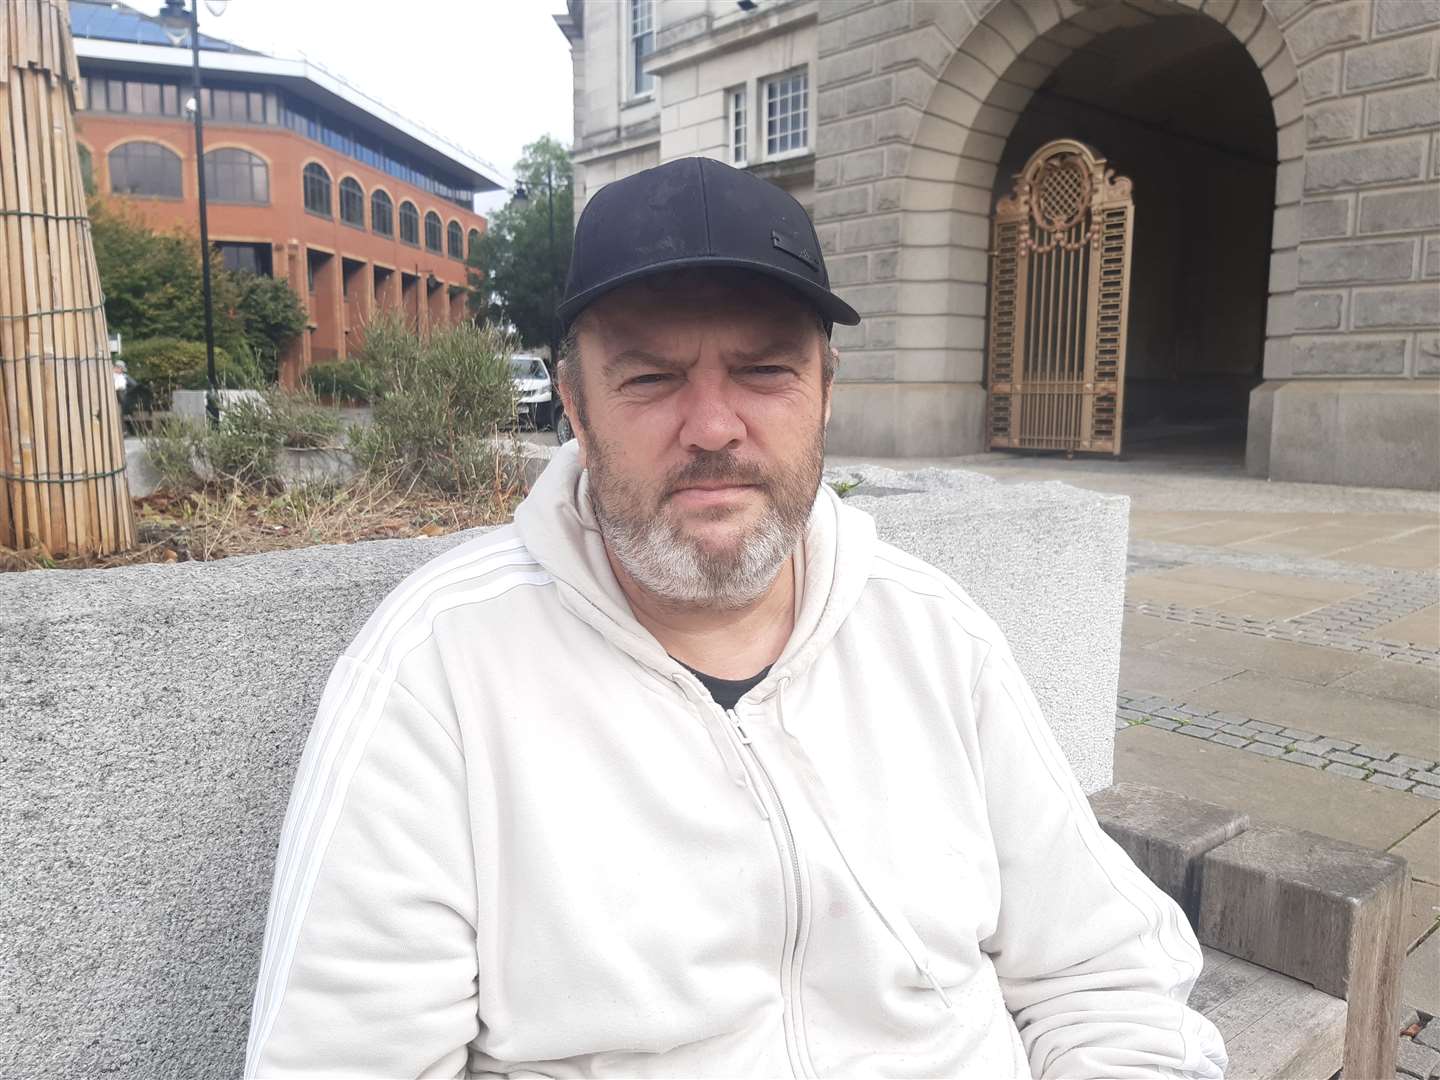 Simon Winch from Maidstone described how sad the day was for the nation